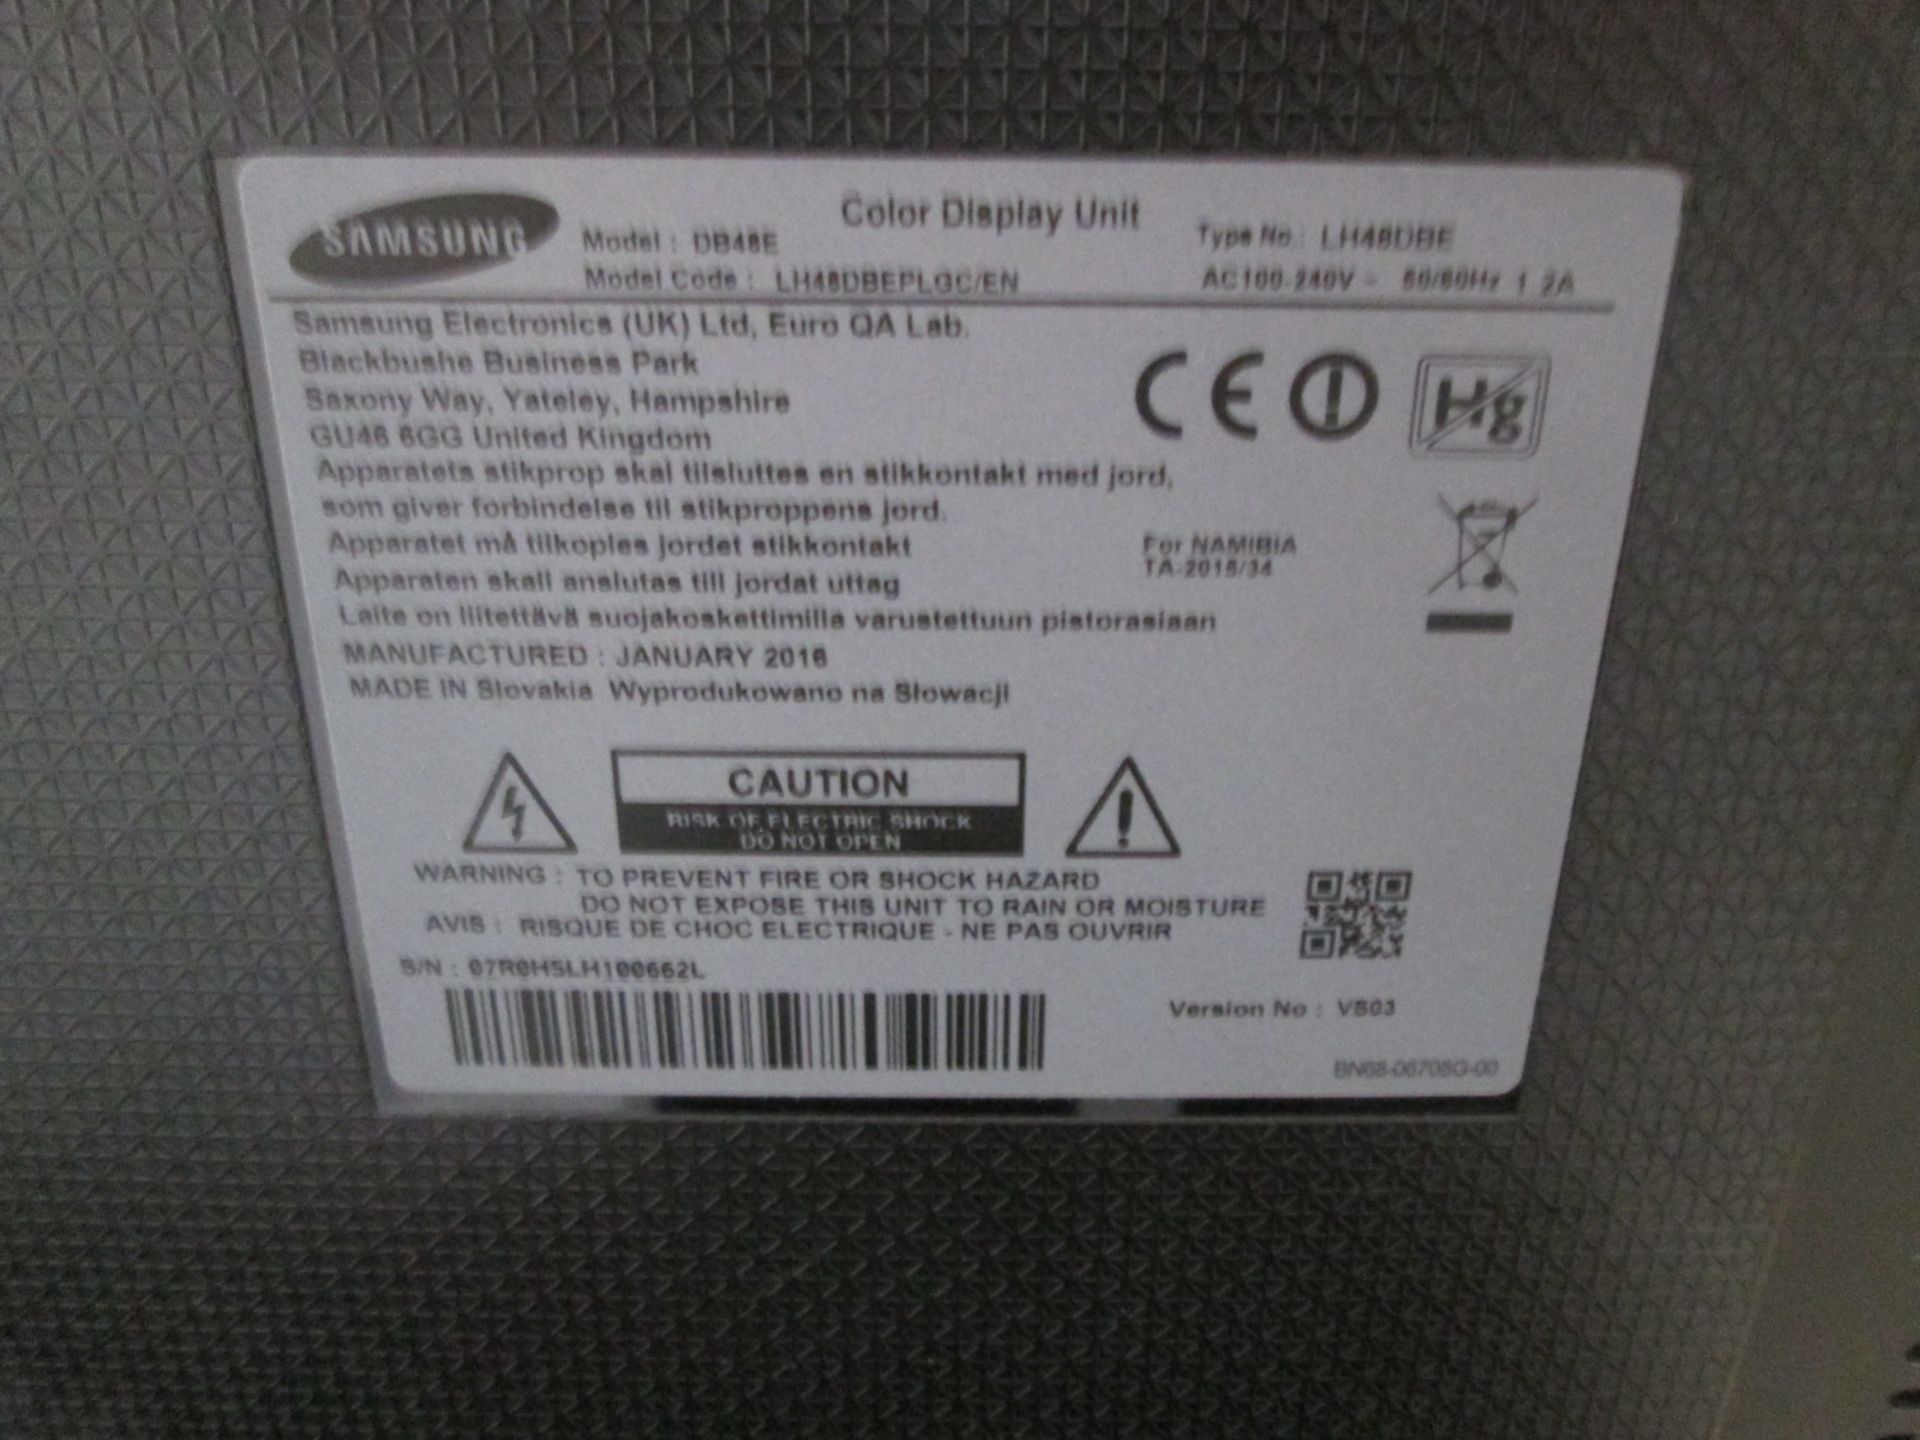 Samsung 48" Colour Monitor, Model DB48E, S/N 07R0HSLH100662L, YOM 2016, Includes flight case, - Image 3 of 4